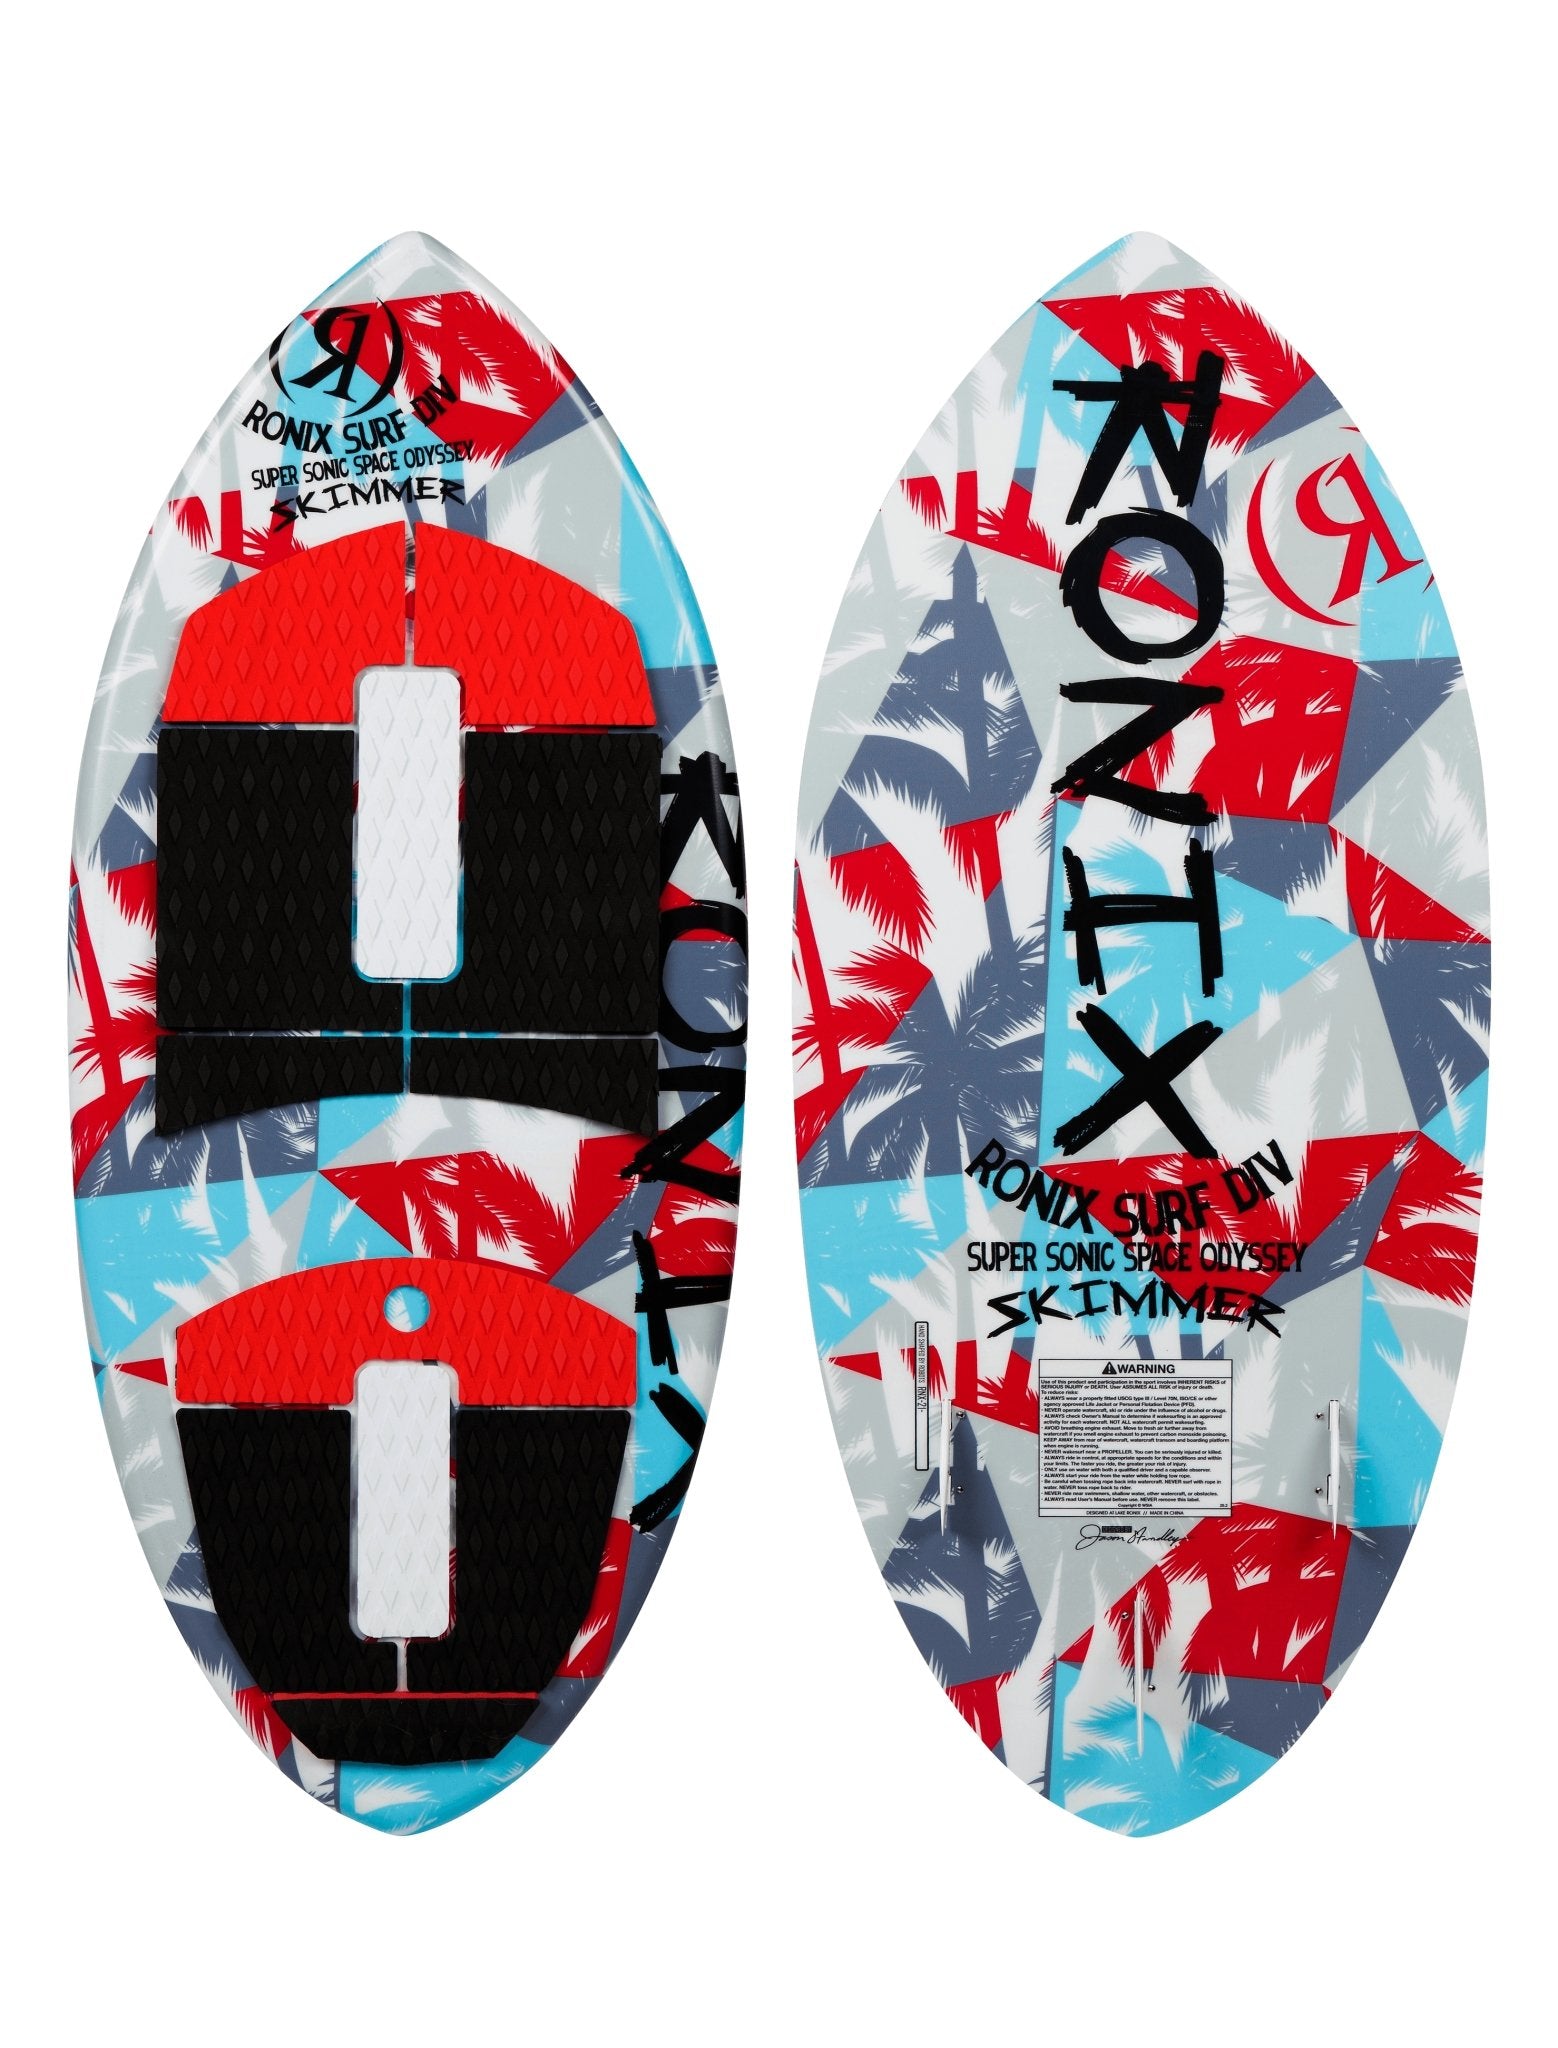 2023 Ronix Super Sonic Space Odyssey - Skimmer -Ronix232462-White / Red / Blue-3 11